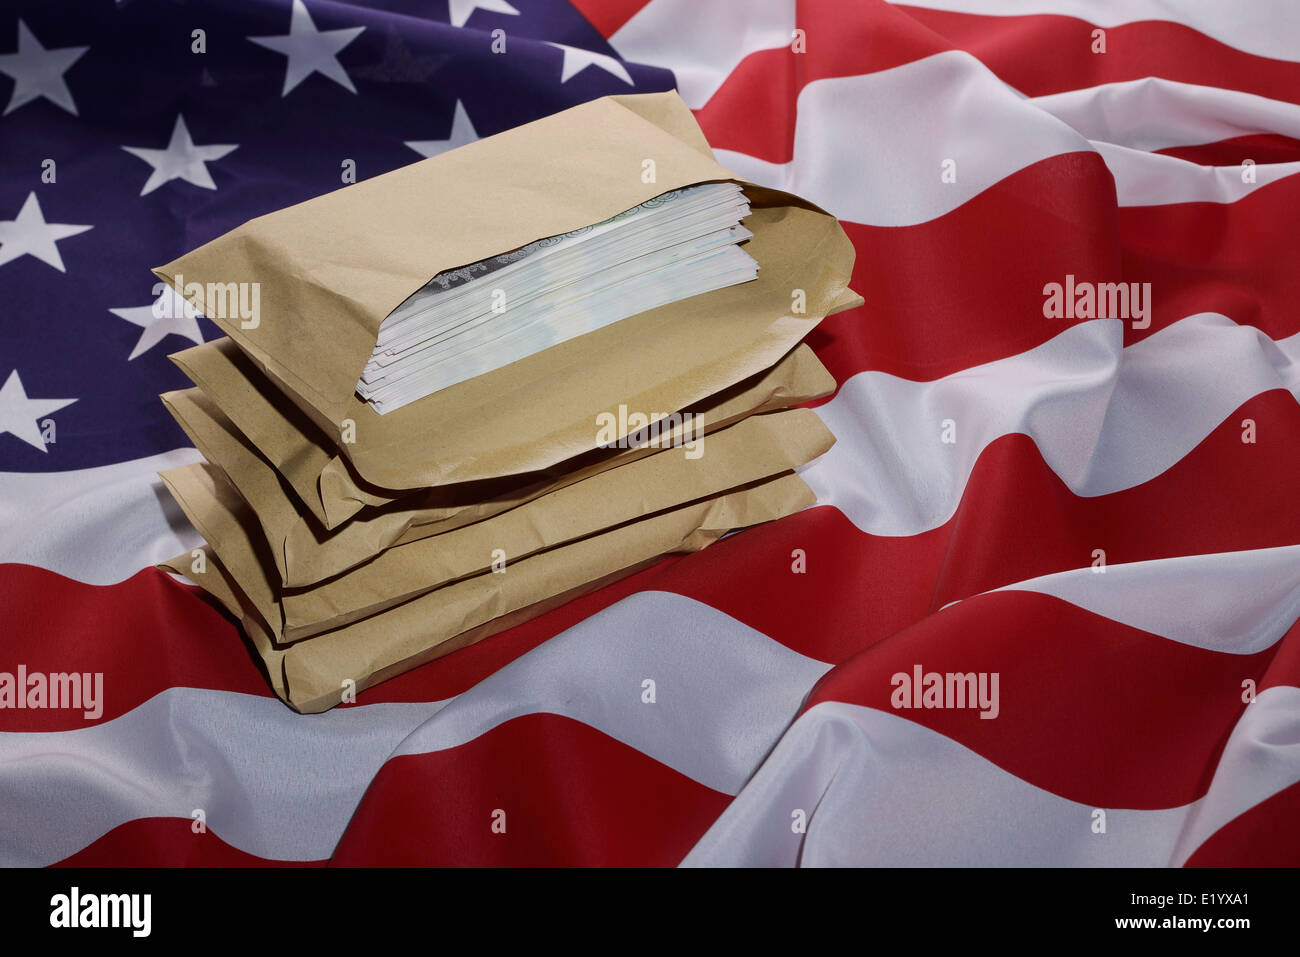 American flag with brown envelopes full of money Stock Photo